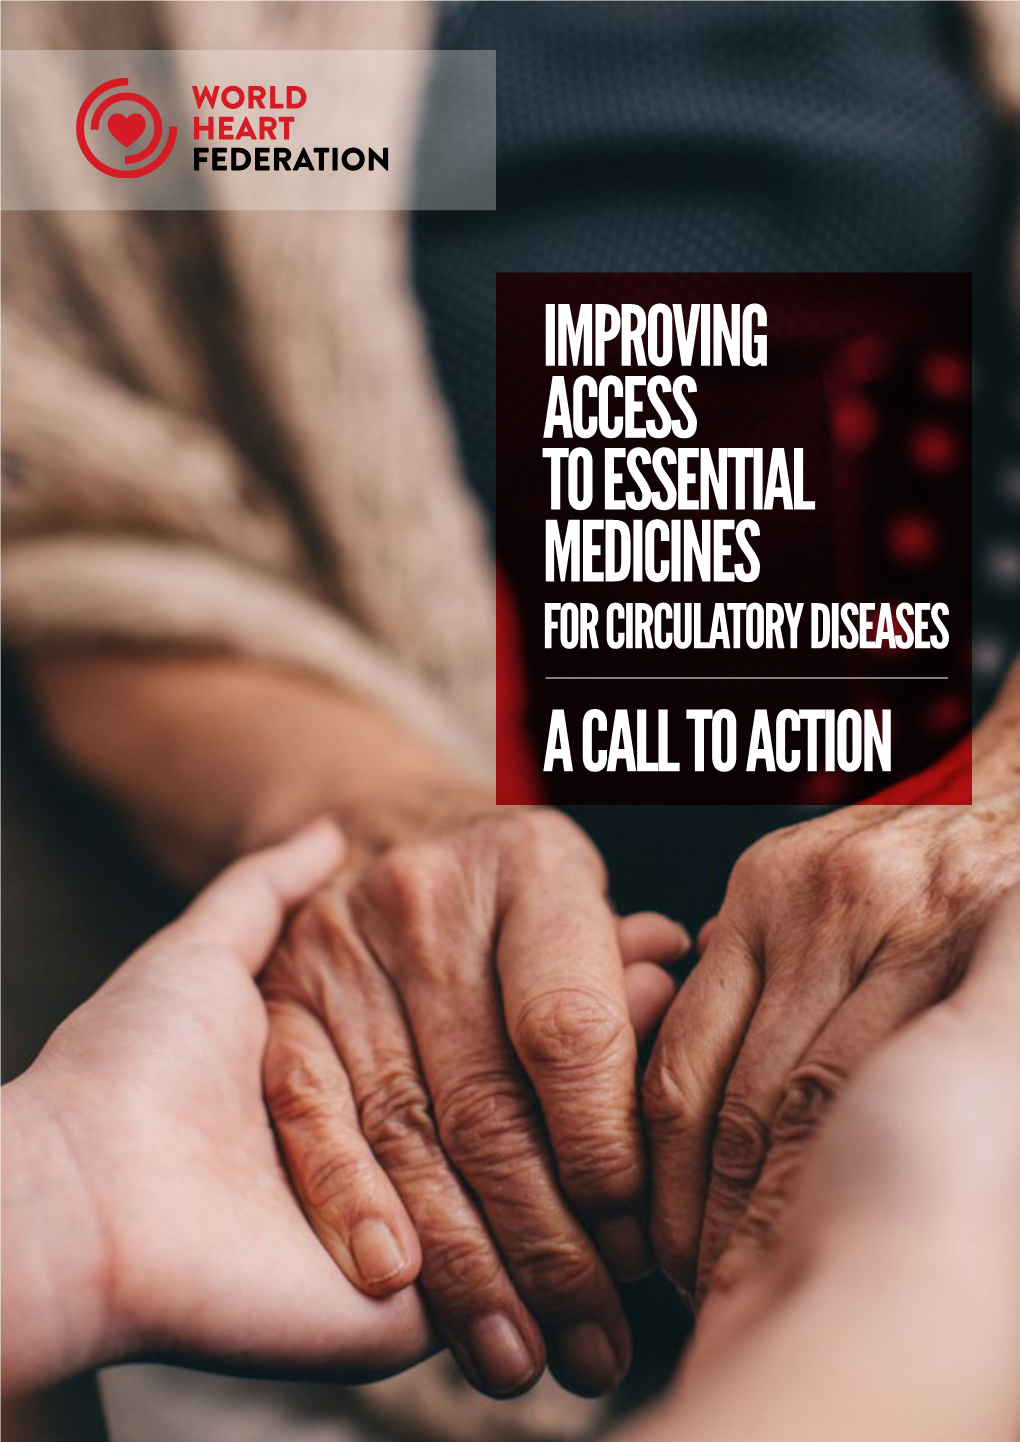 Access to Essential Medicines for Cardiovascular Diseases